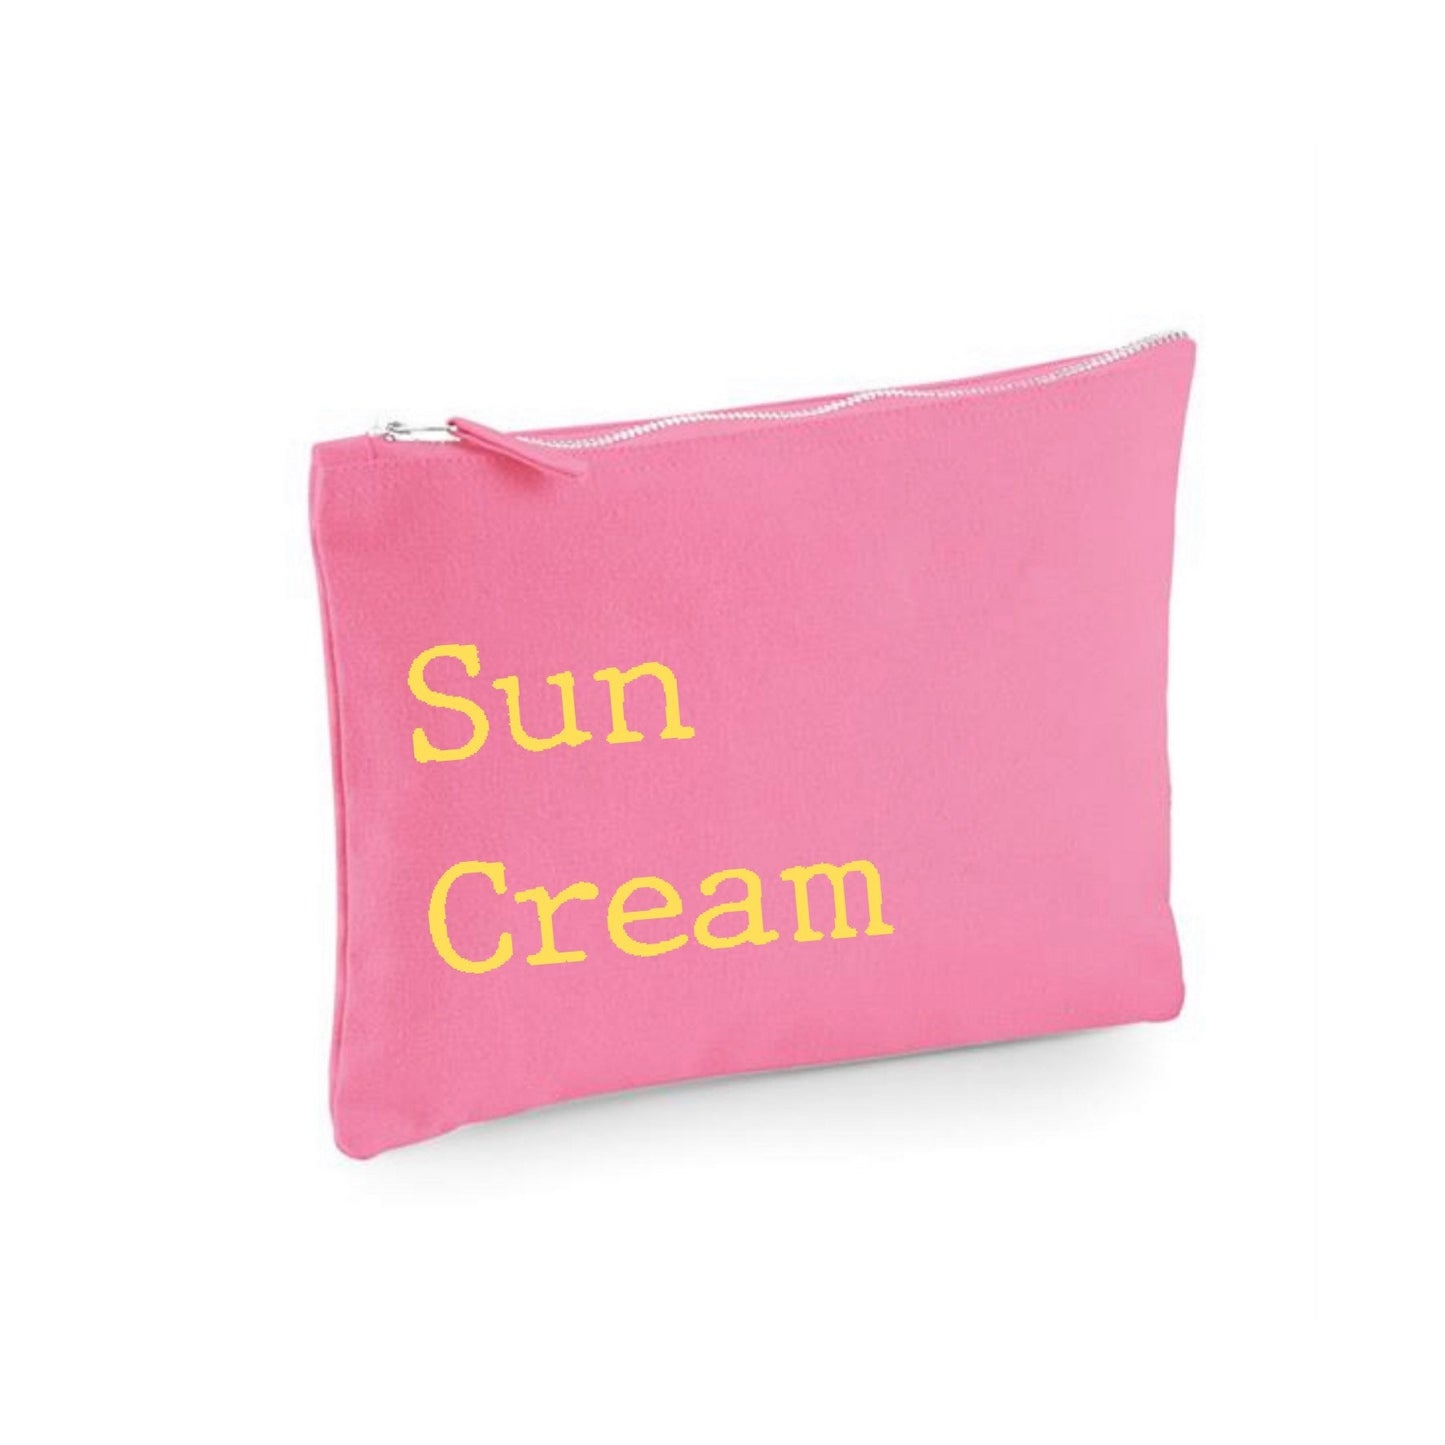 Children’s sun stuff pouch, personalised kids case for sun safe items like suncream, sunglasses and hat. Nursery sun bag or beach day